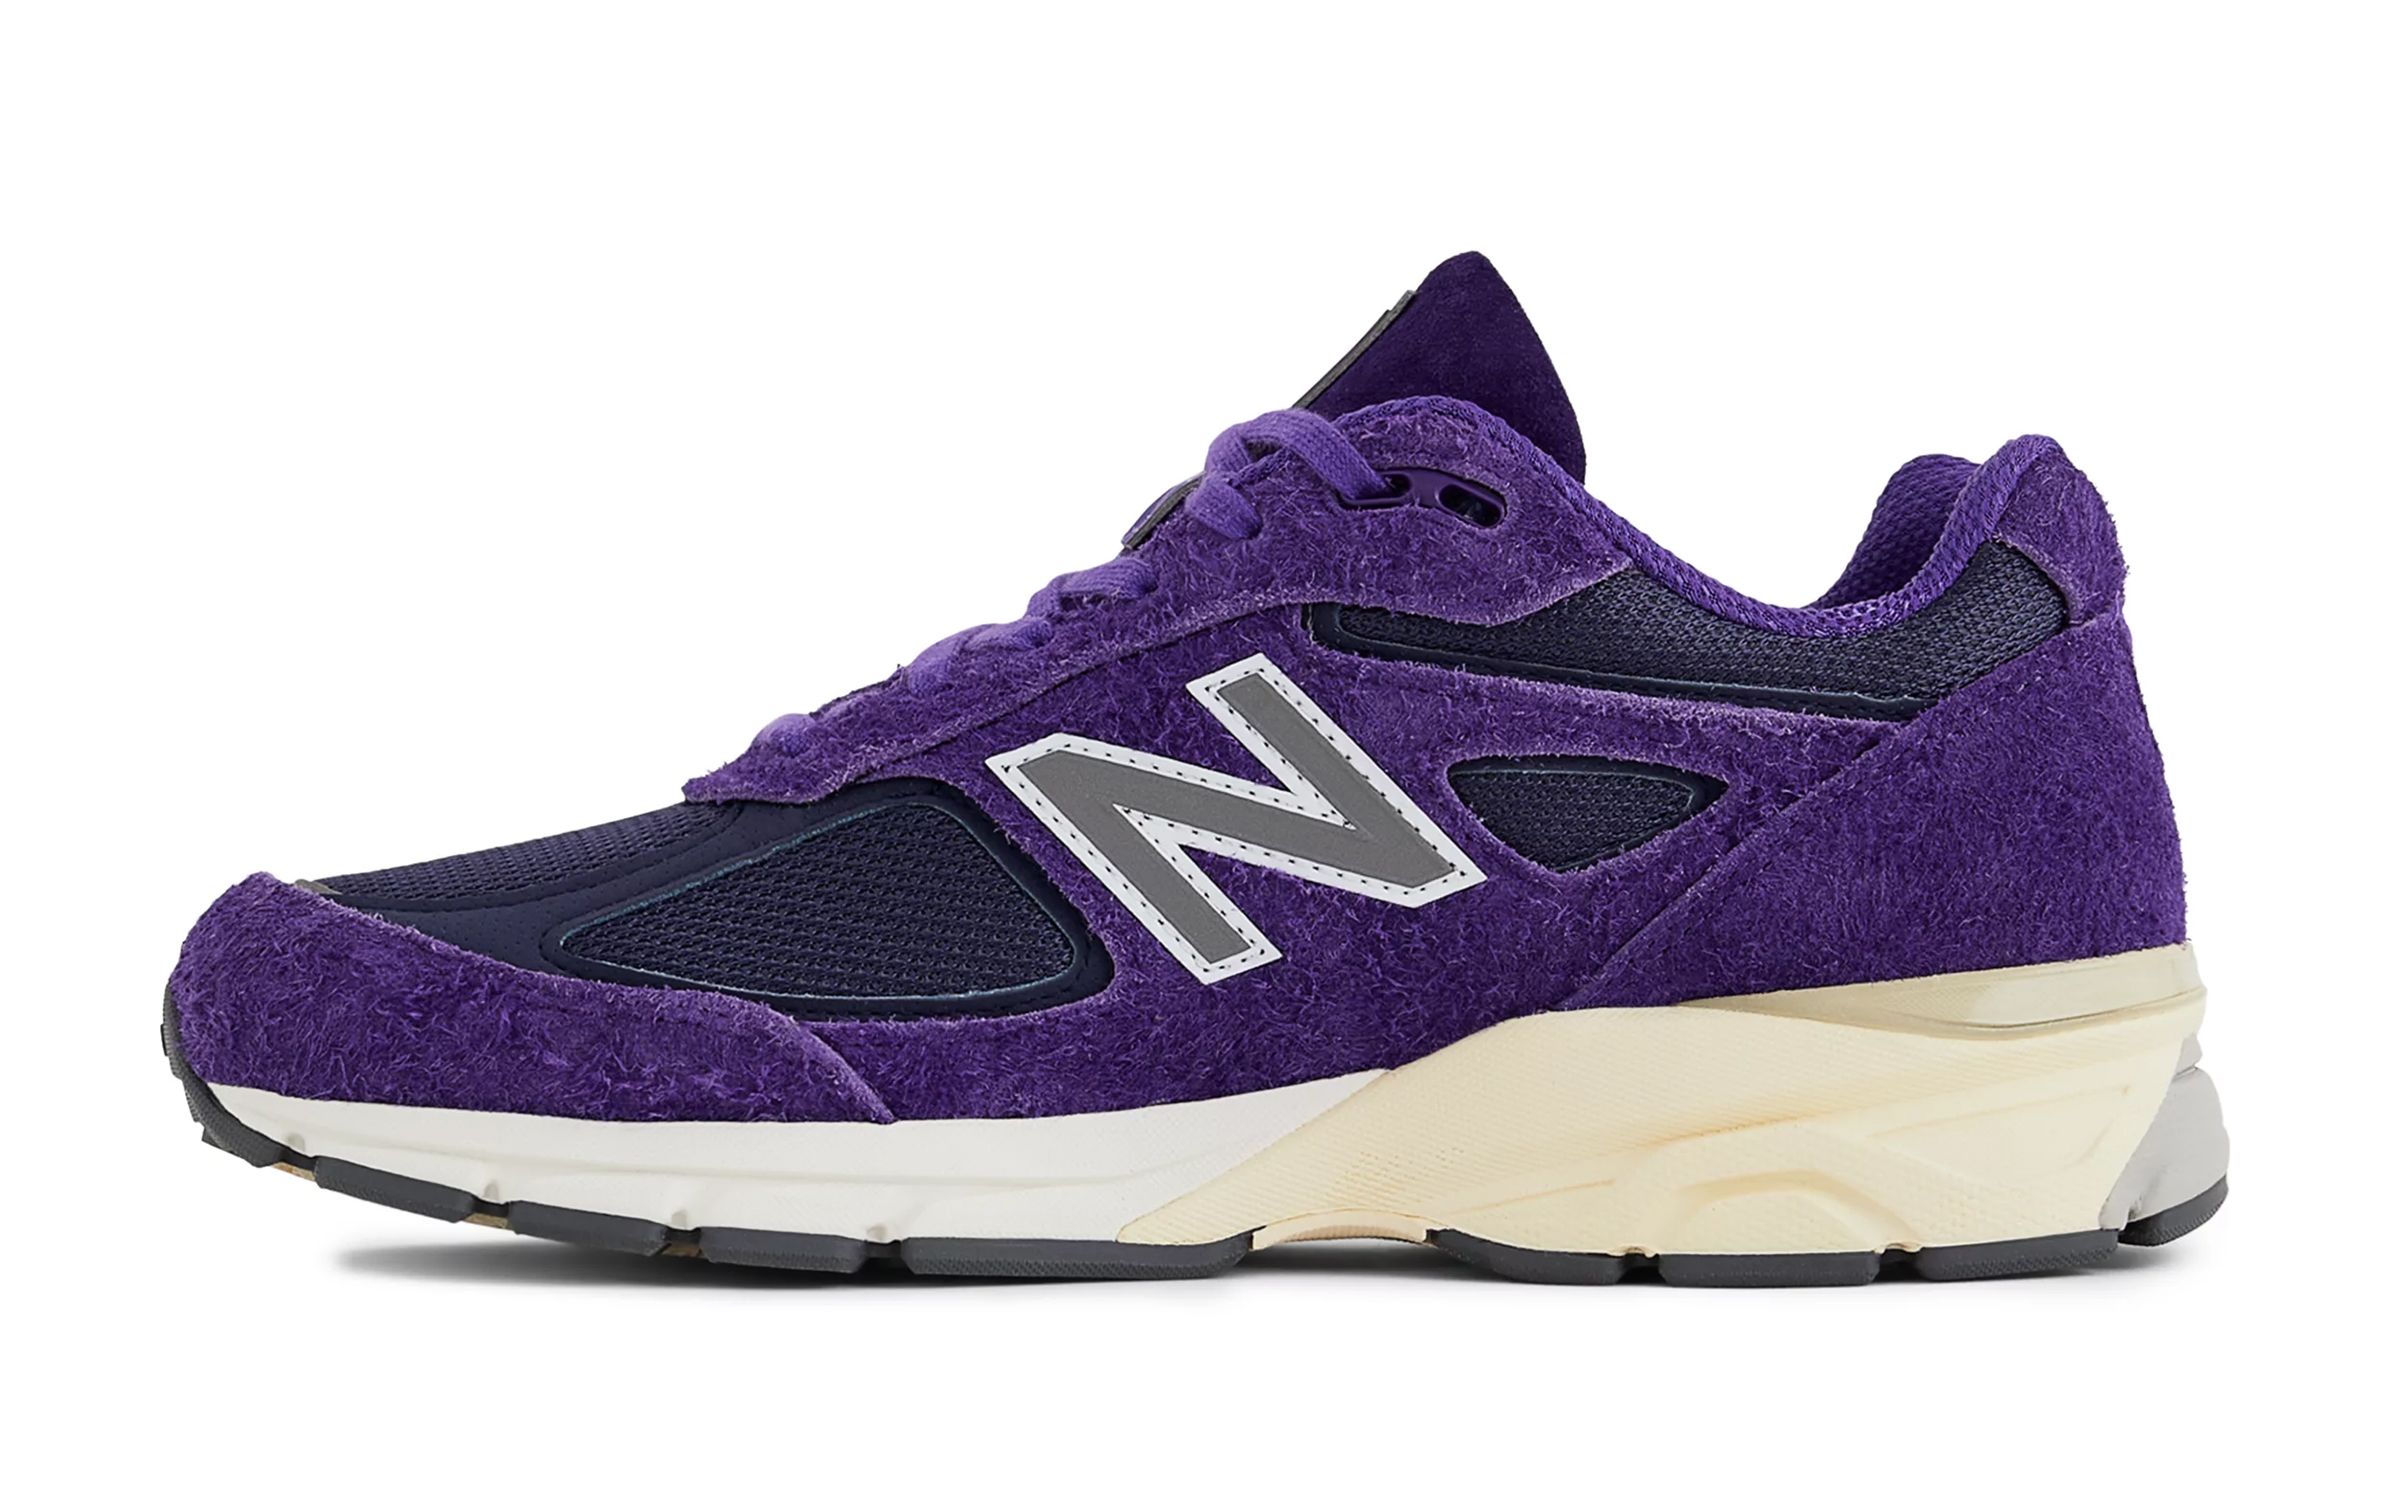 The New Balance 990v4 Surfaces in Purple Suede | House of Heat°